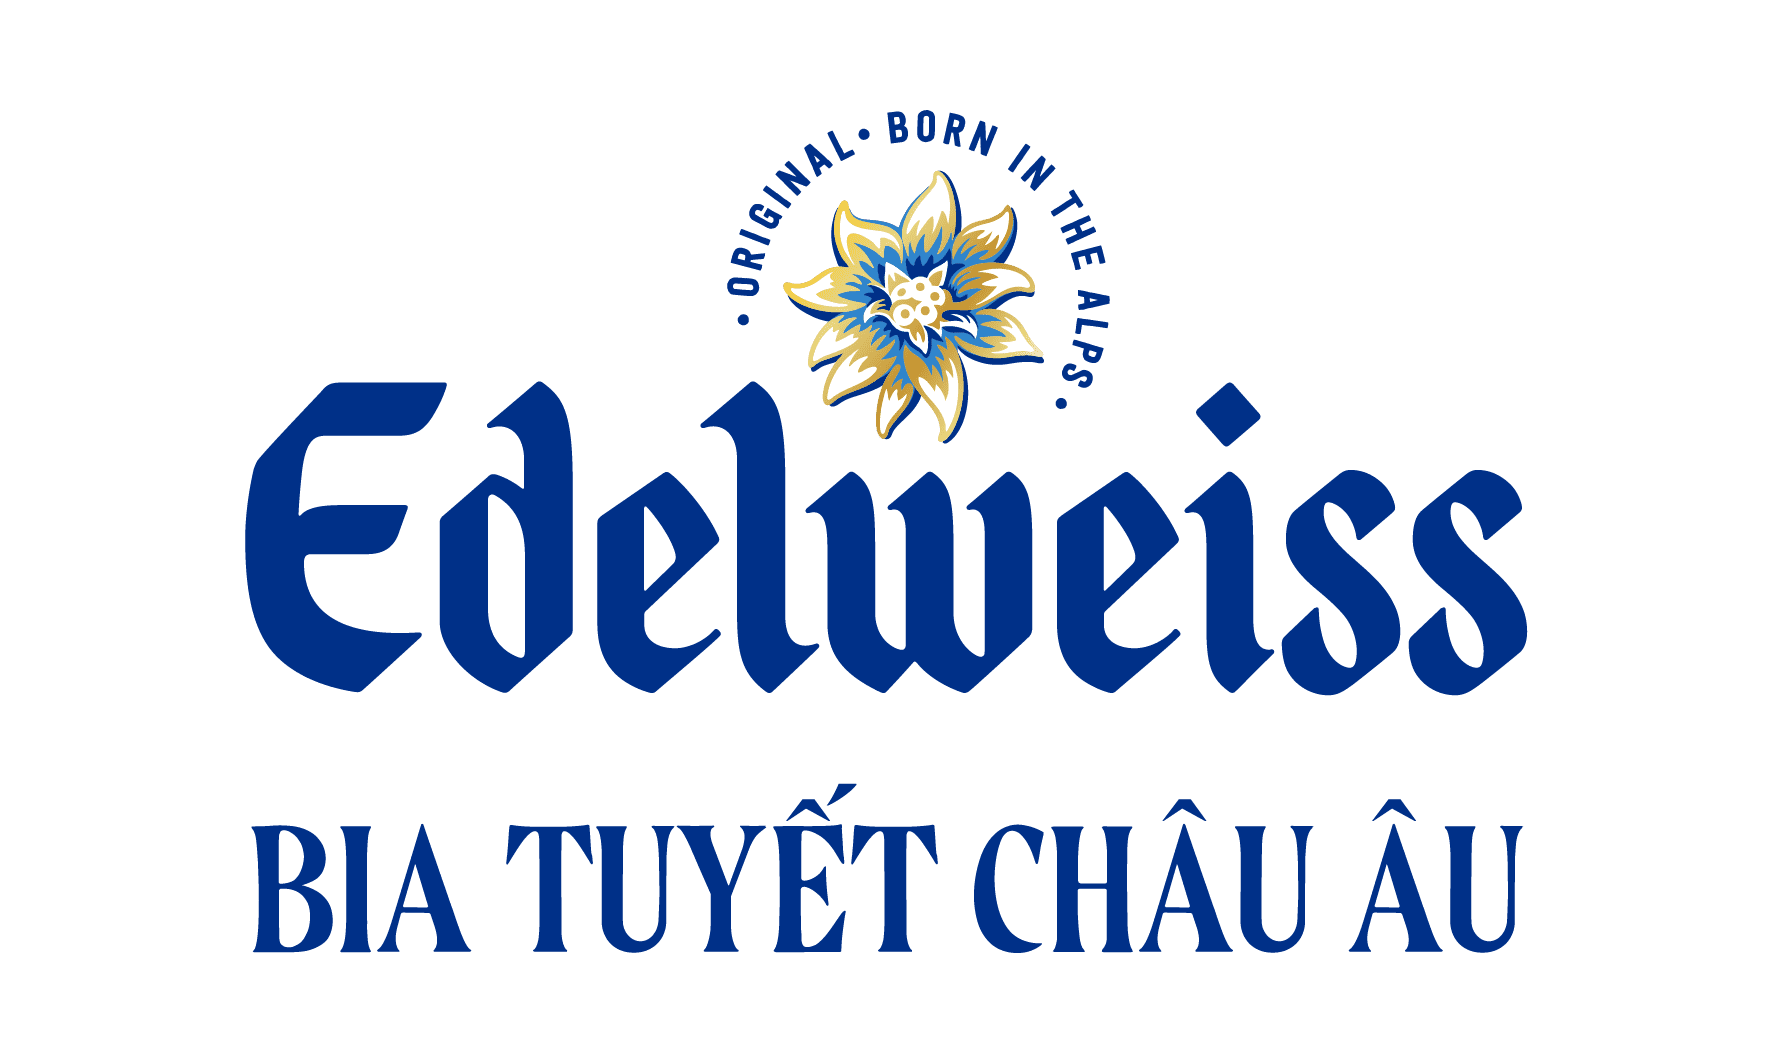 A case of Edelweiss Beer (3 winners)-image